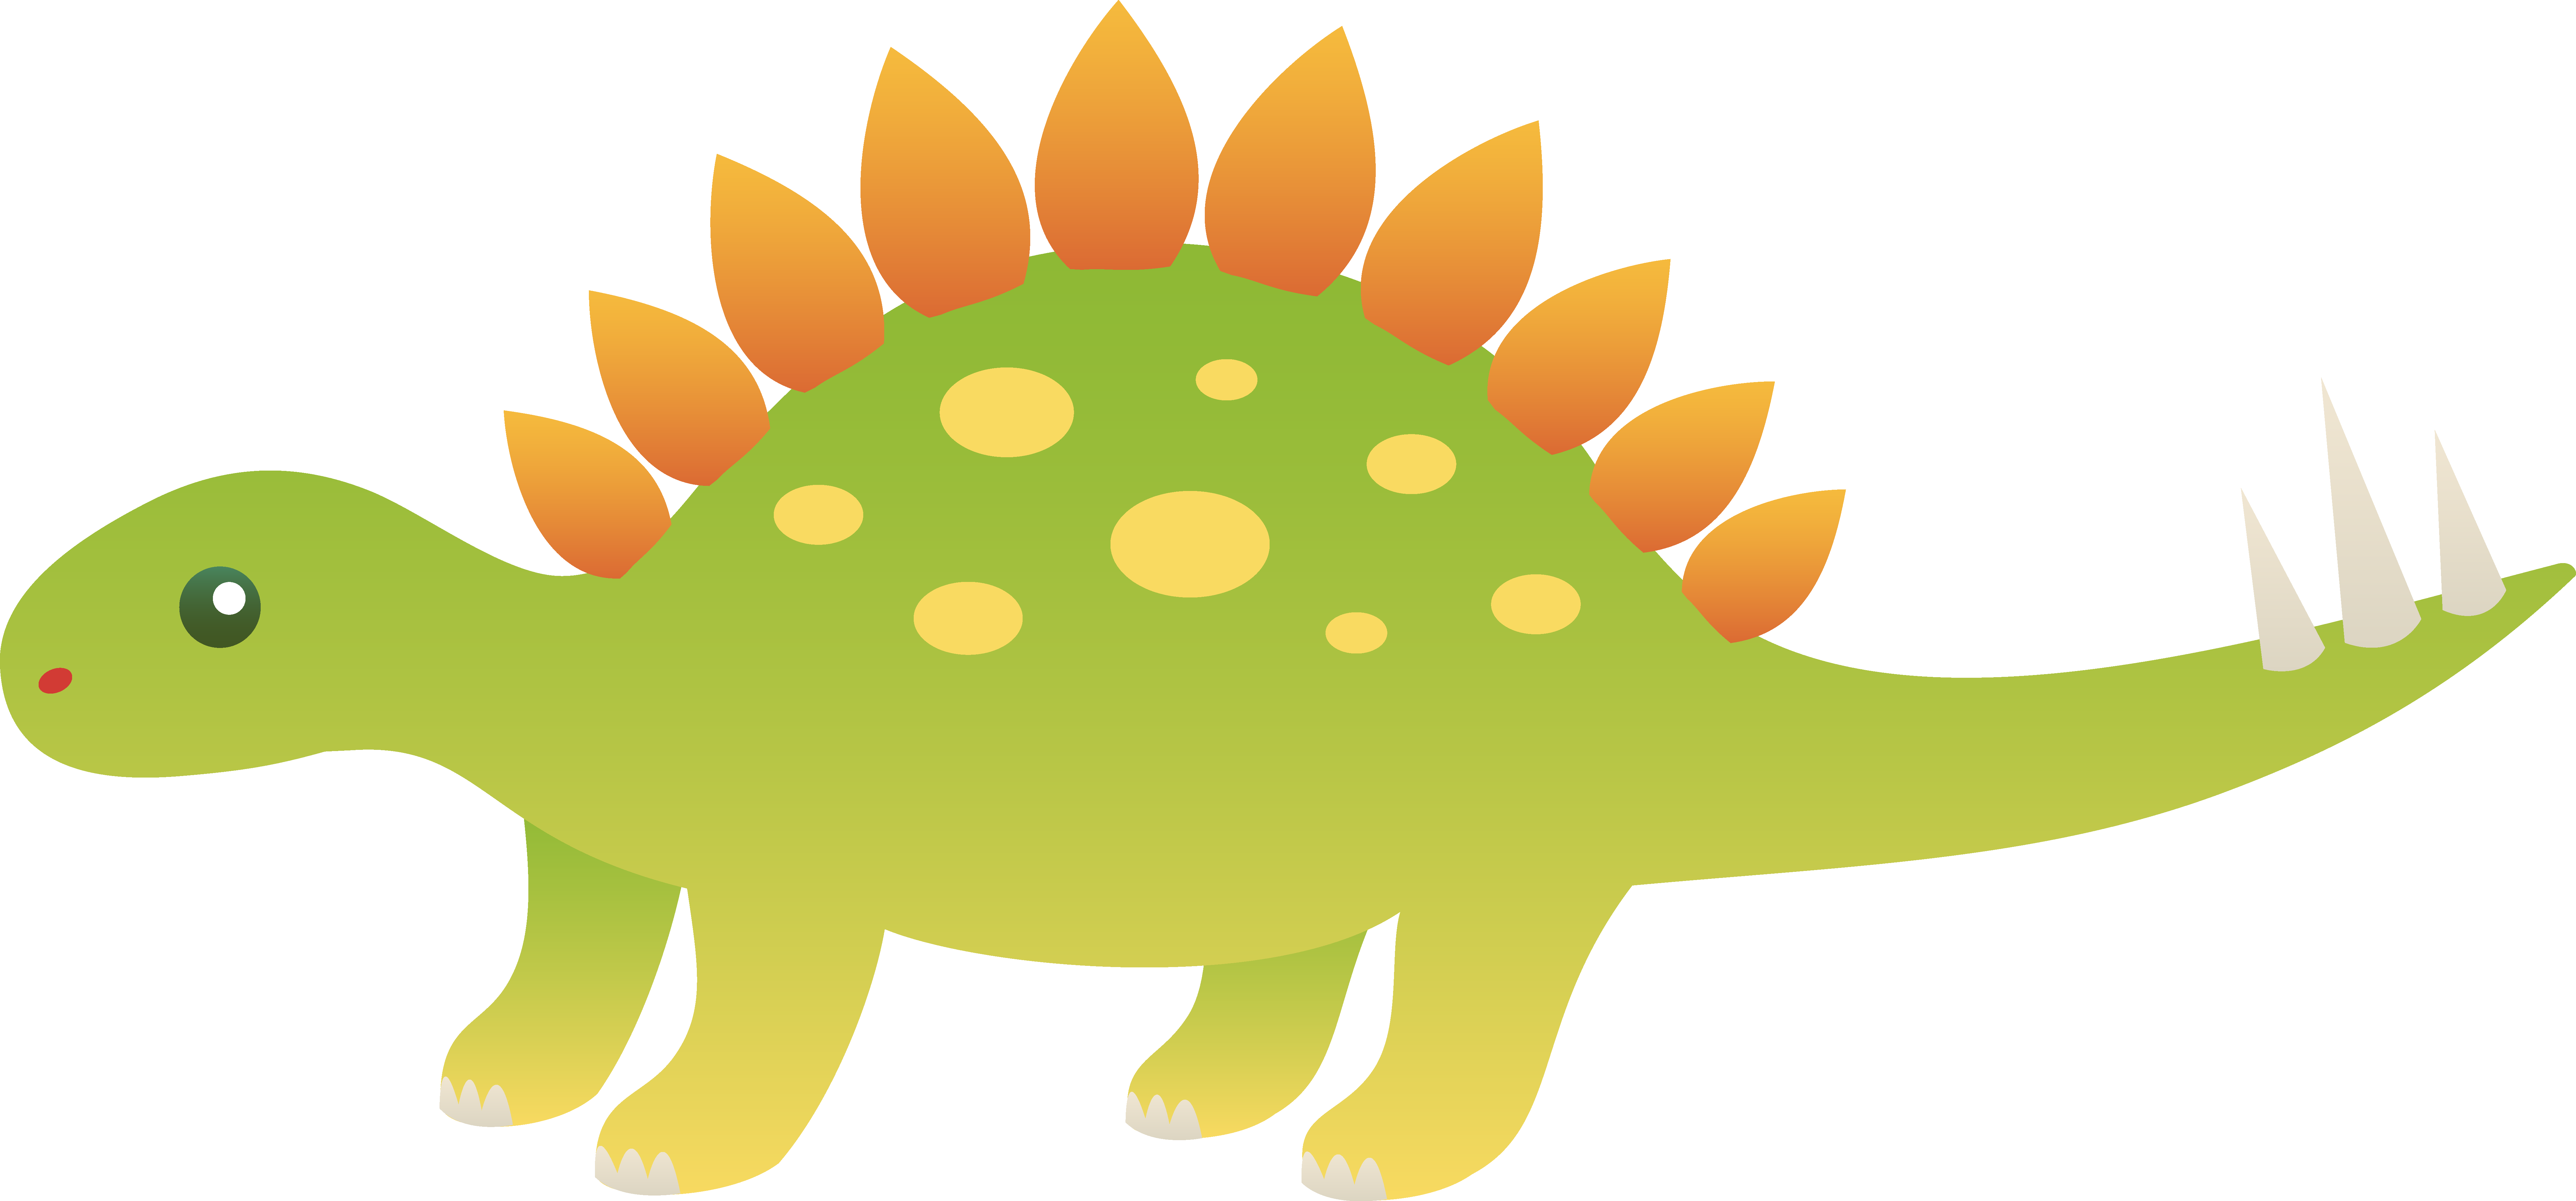 baby-triceratops-clip-art-dinosaur-vector-png-download-5573-4683